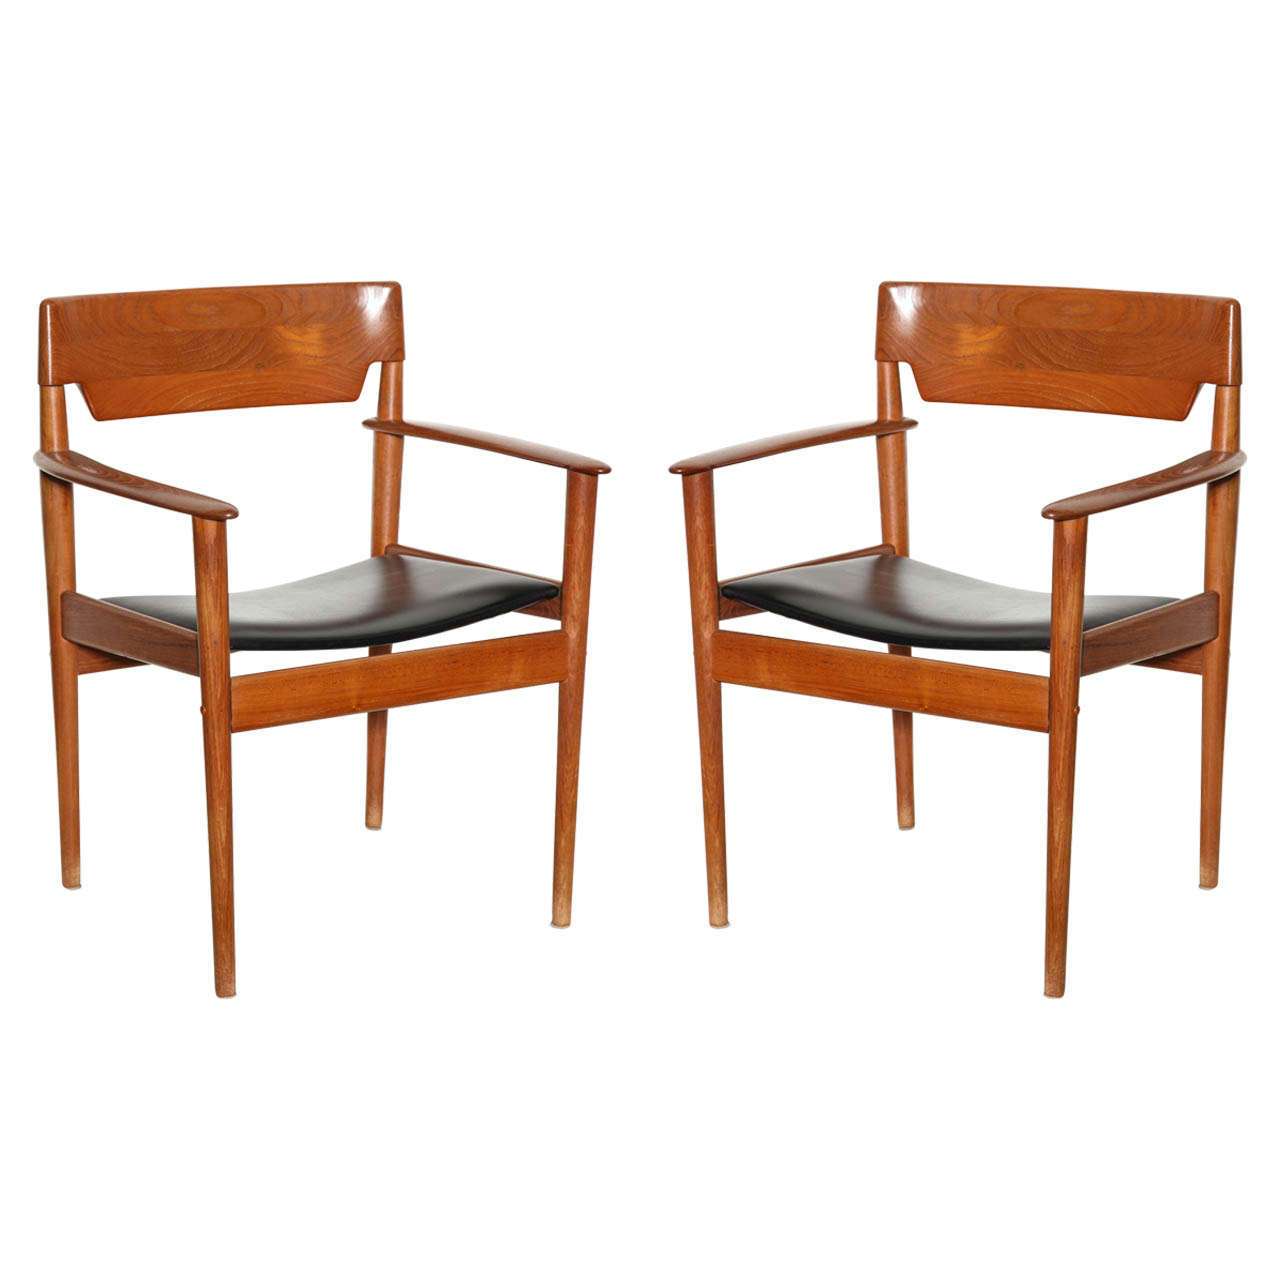 Grete Jalk Arm Chairs